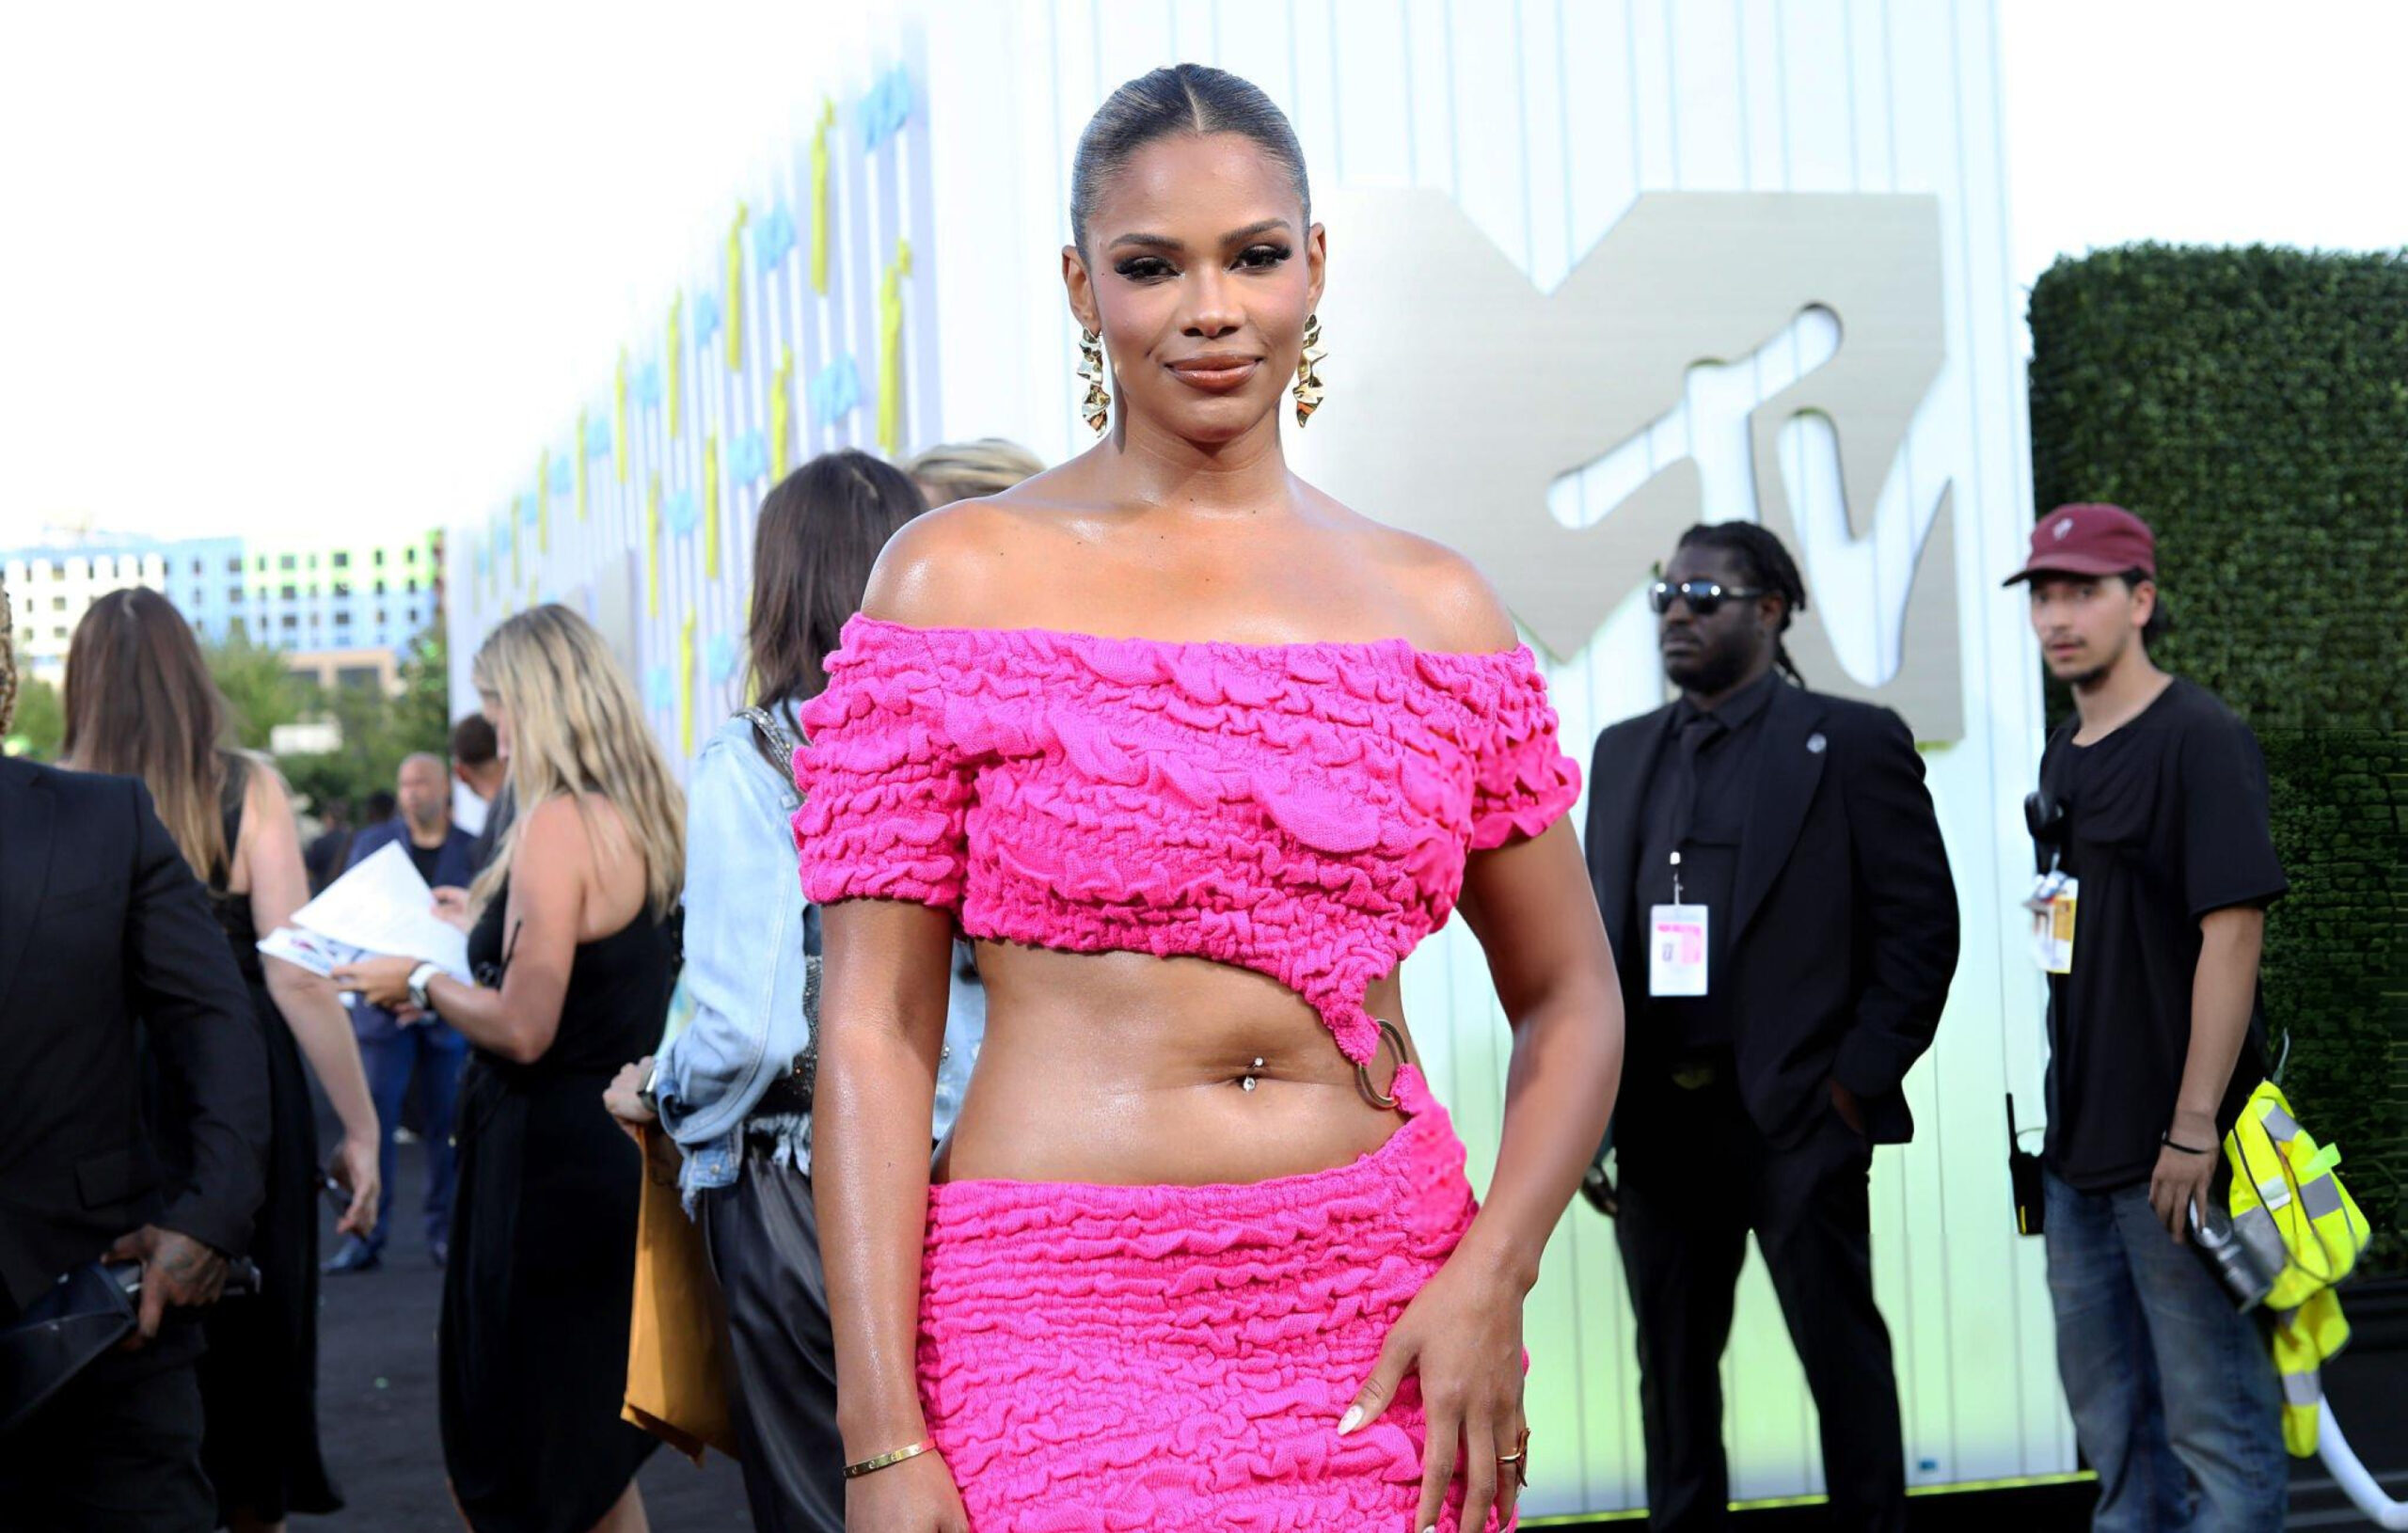 Kamie Crawford at the 2022 MTV Video Music Awards held at Prudential Center on August 28, 2022 in Newark, New Jersey